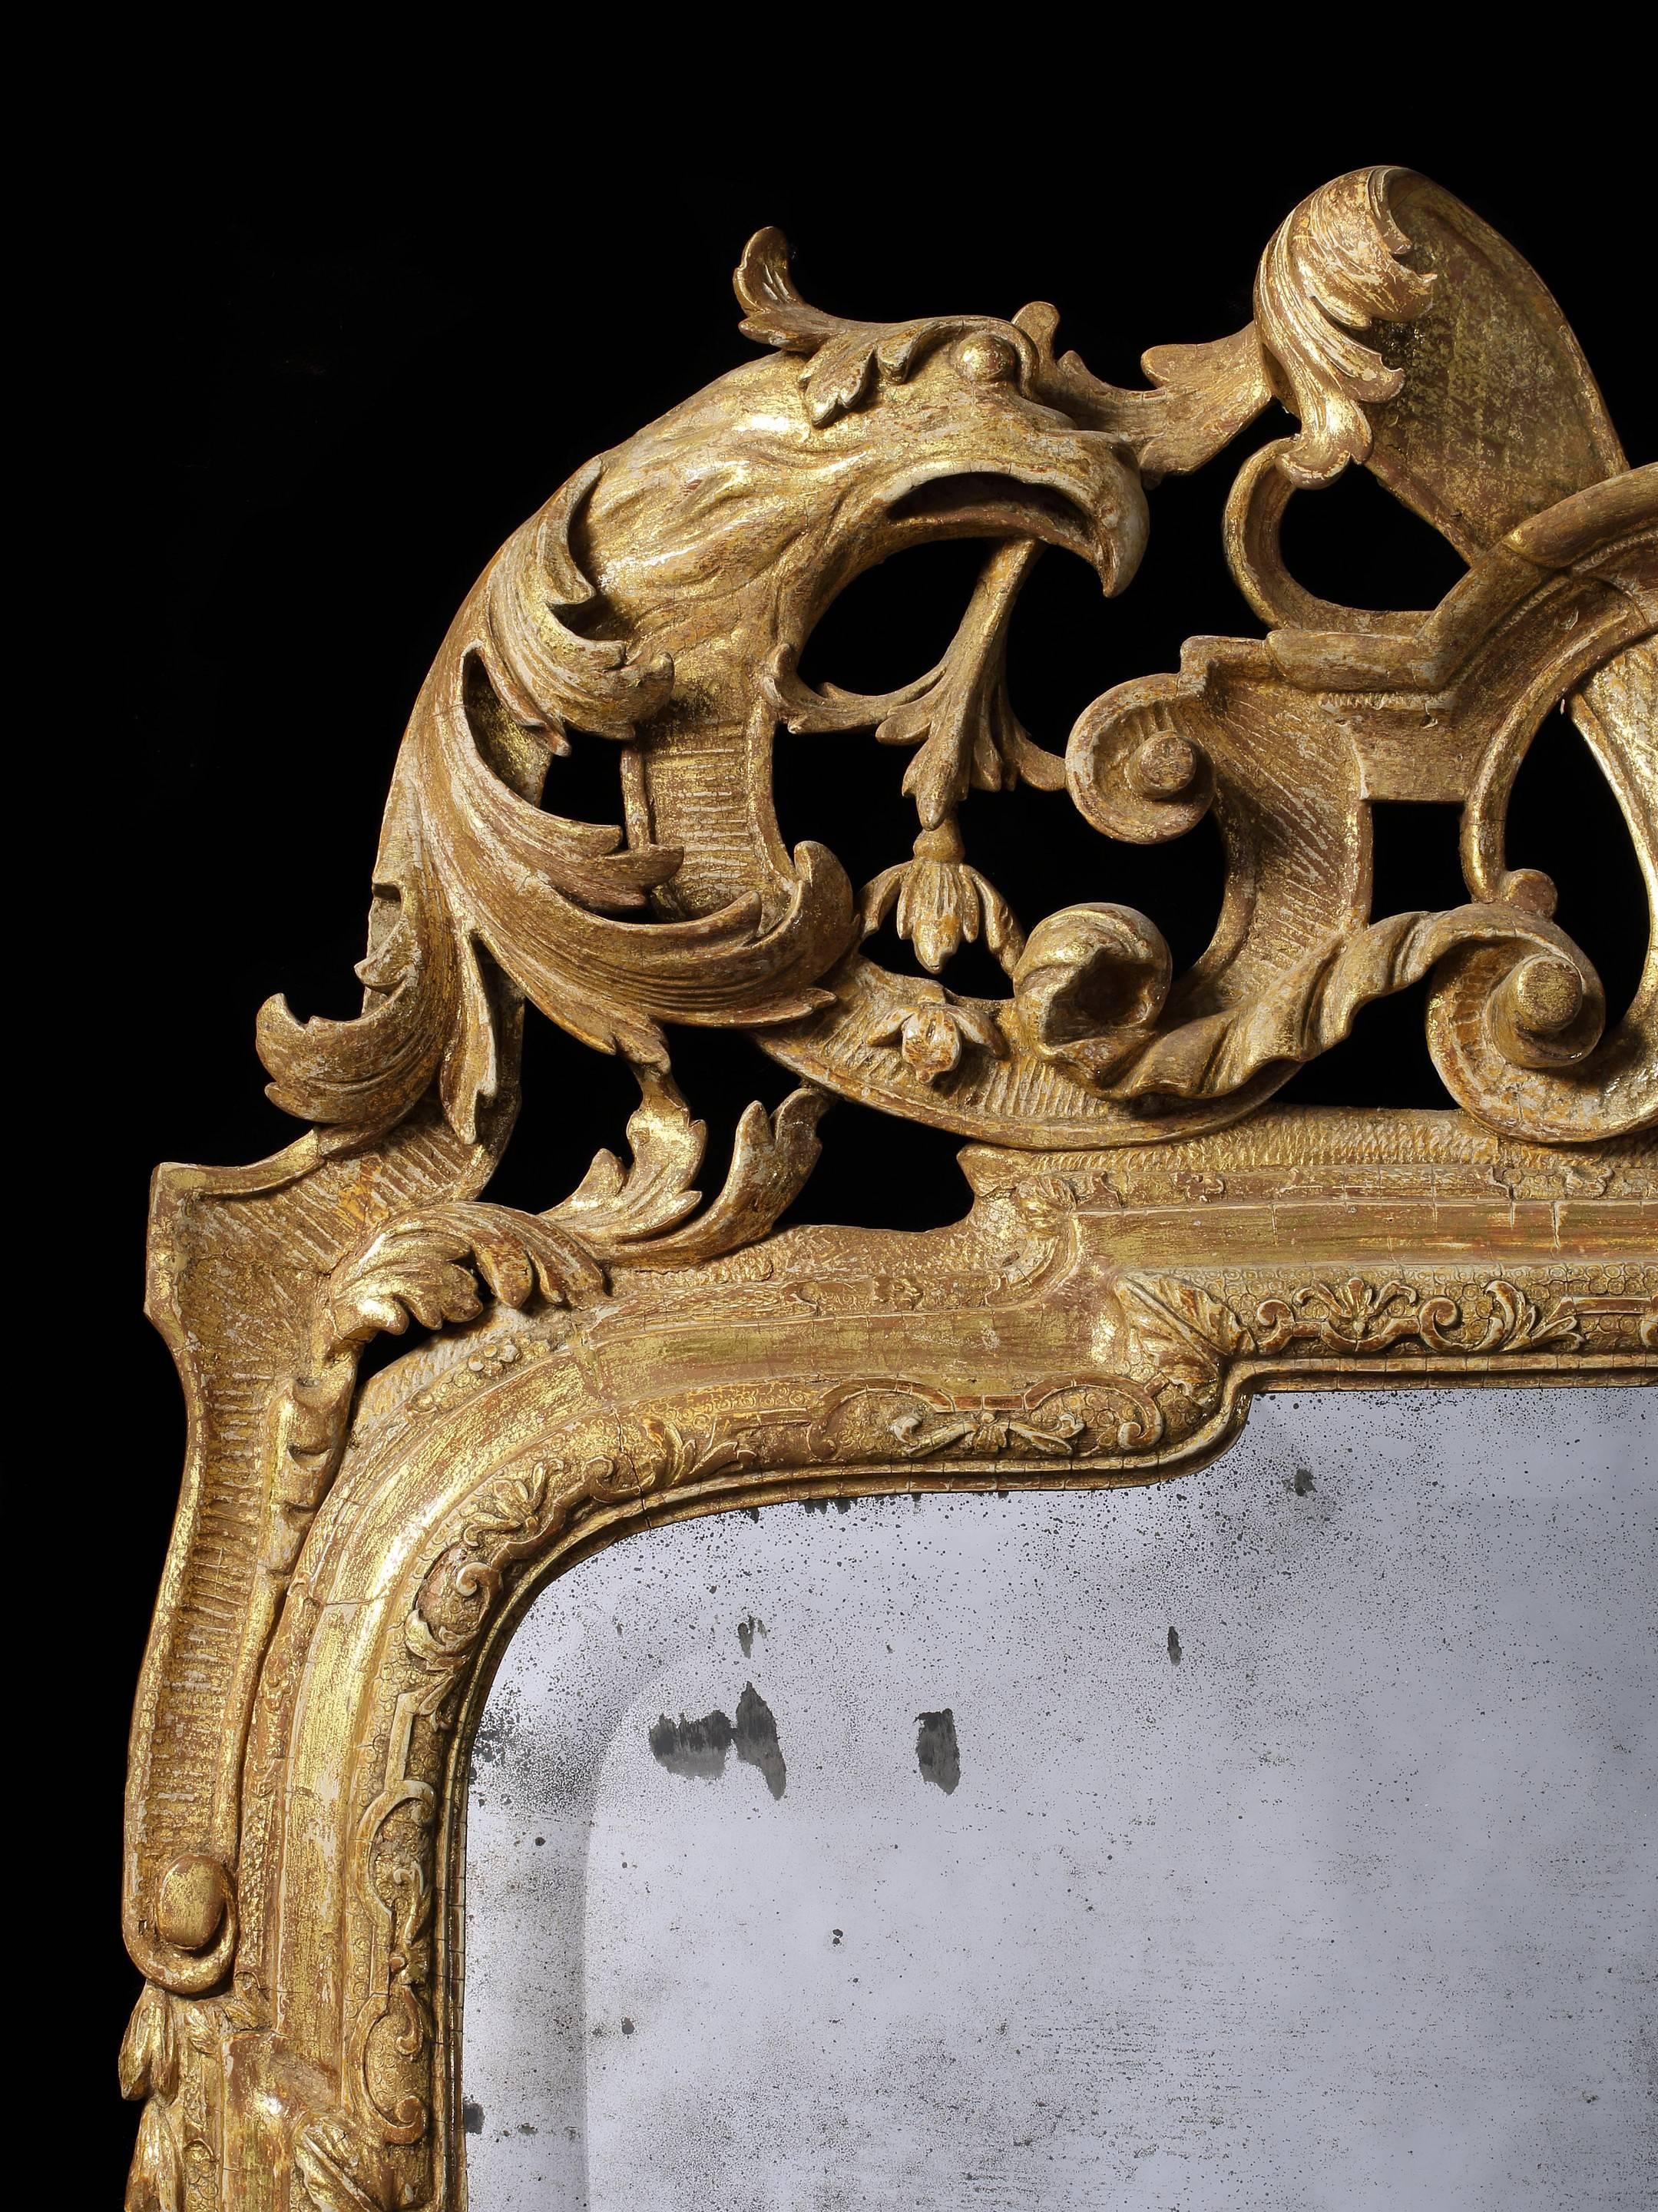 The mirror retains the original shaped and bevelled mirror plate and most of the original gesso and gilding. The glass arms, sockets and supports are restorations.